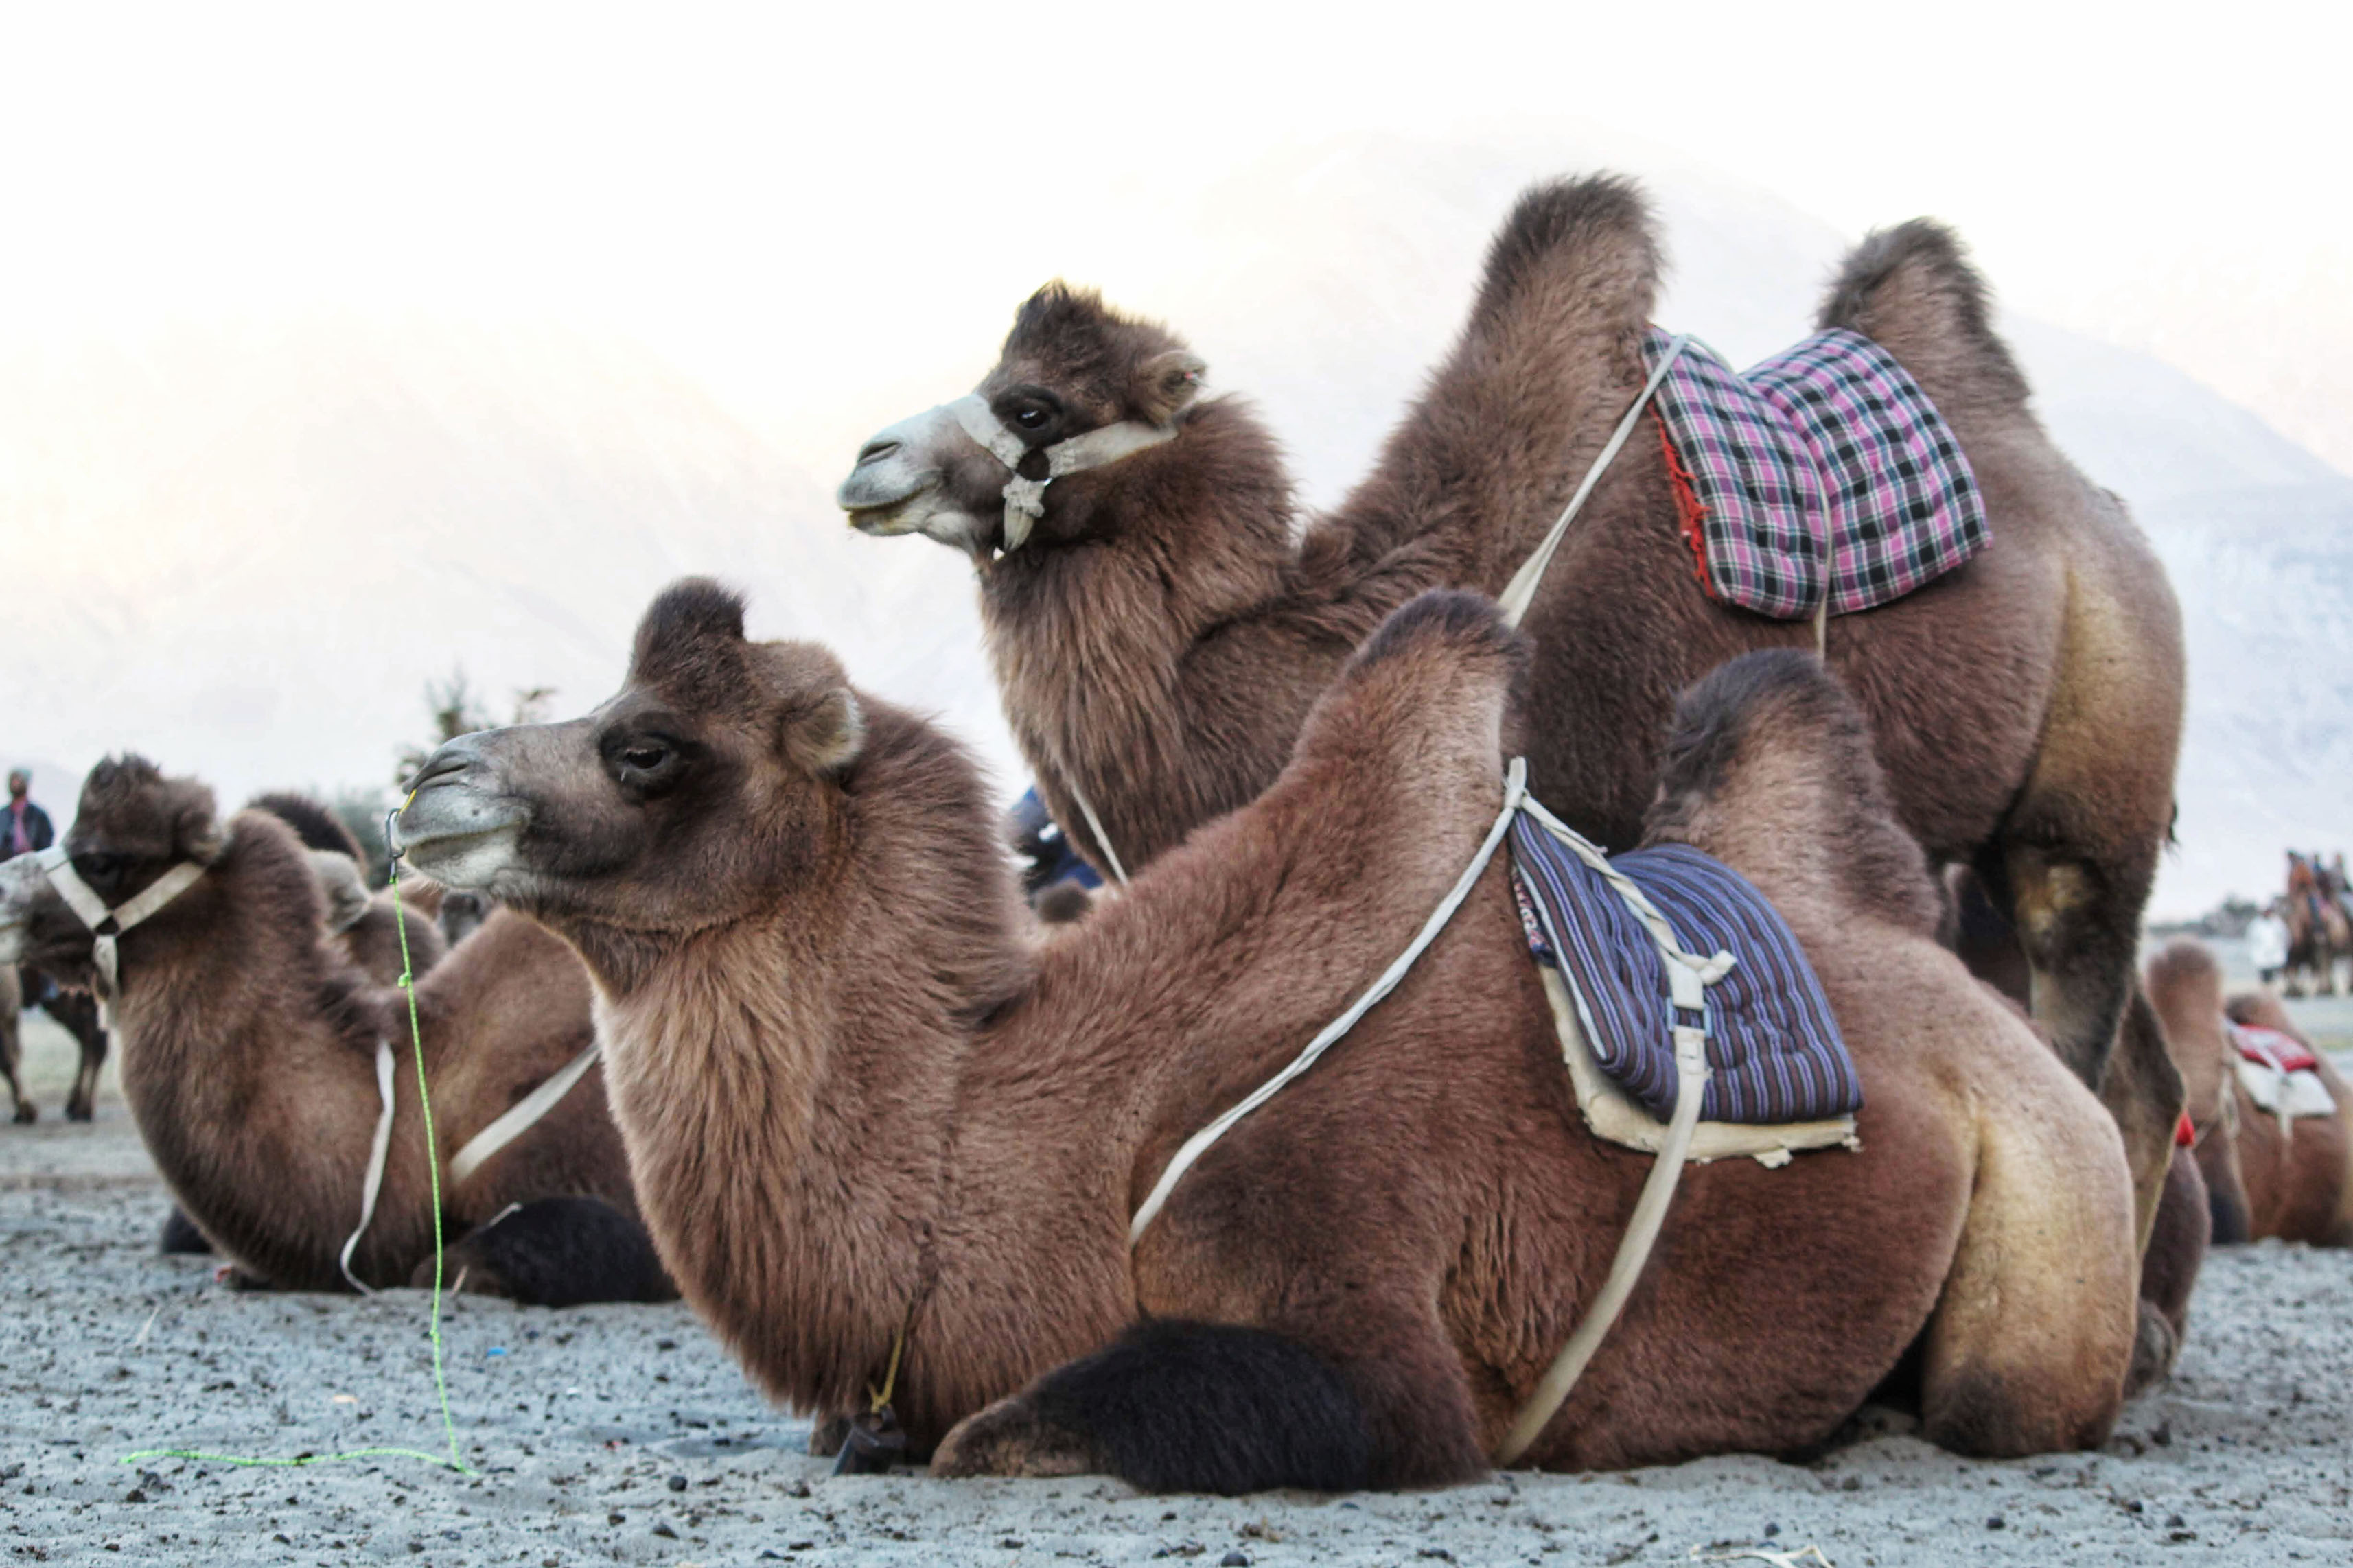 The last remnant of the Silk Road trade in India is the double-humped camel in Ladakh